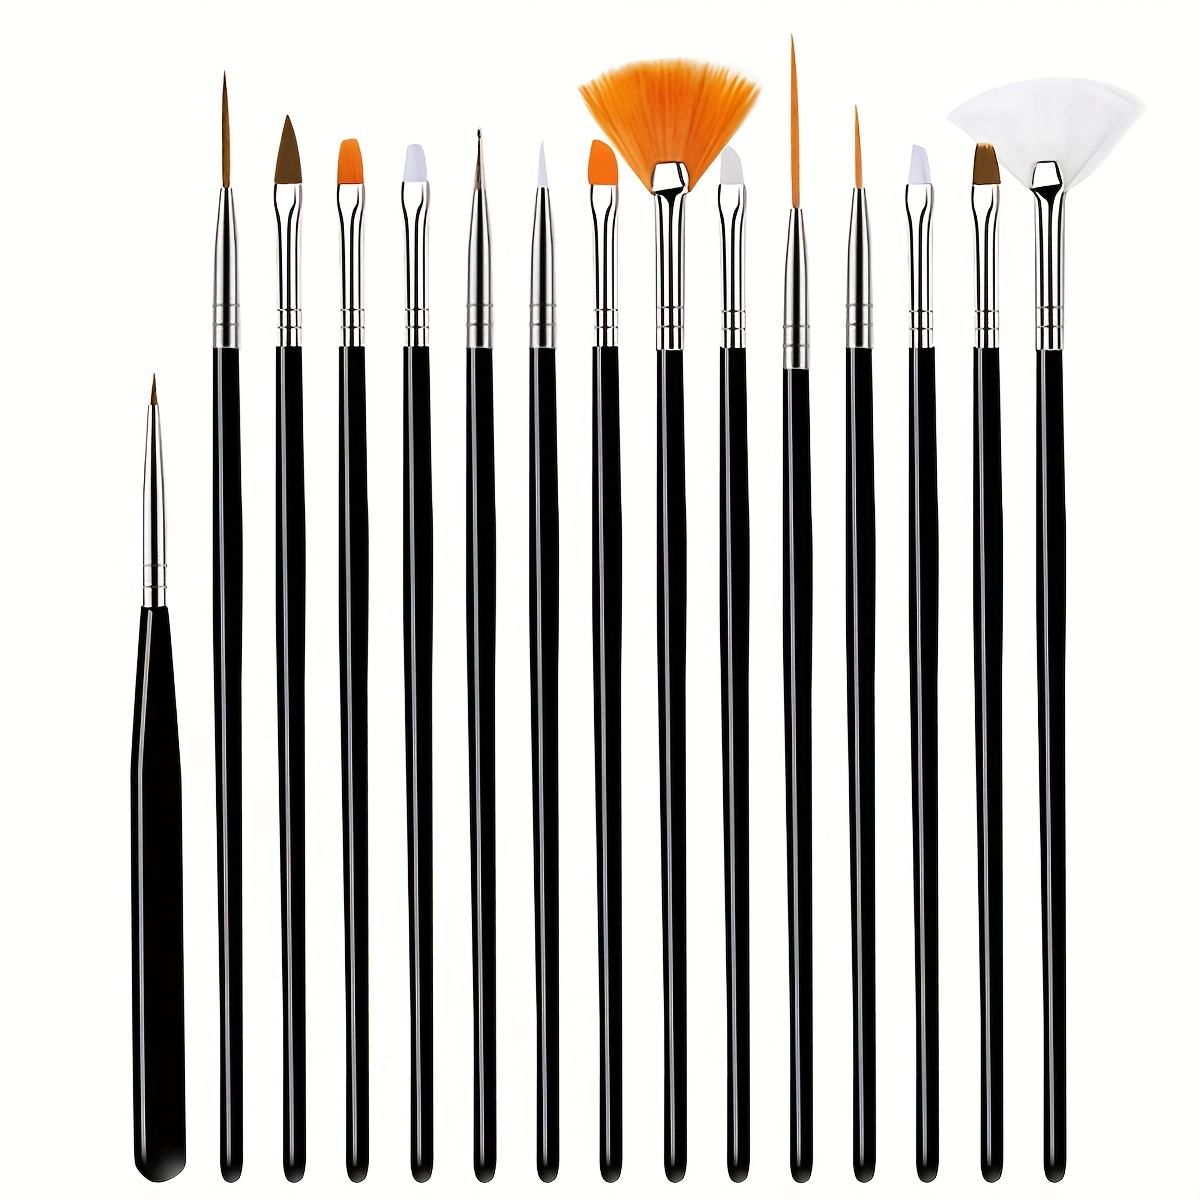 Artist Paint Brushes Set, 20 Pieces Paint Brushes for Acrylic Painting and  1 Pcs Tray Palette, Round Pointed Watercolor Paint Brush for Rock Painting,  Artists, Kids, Adults 